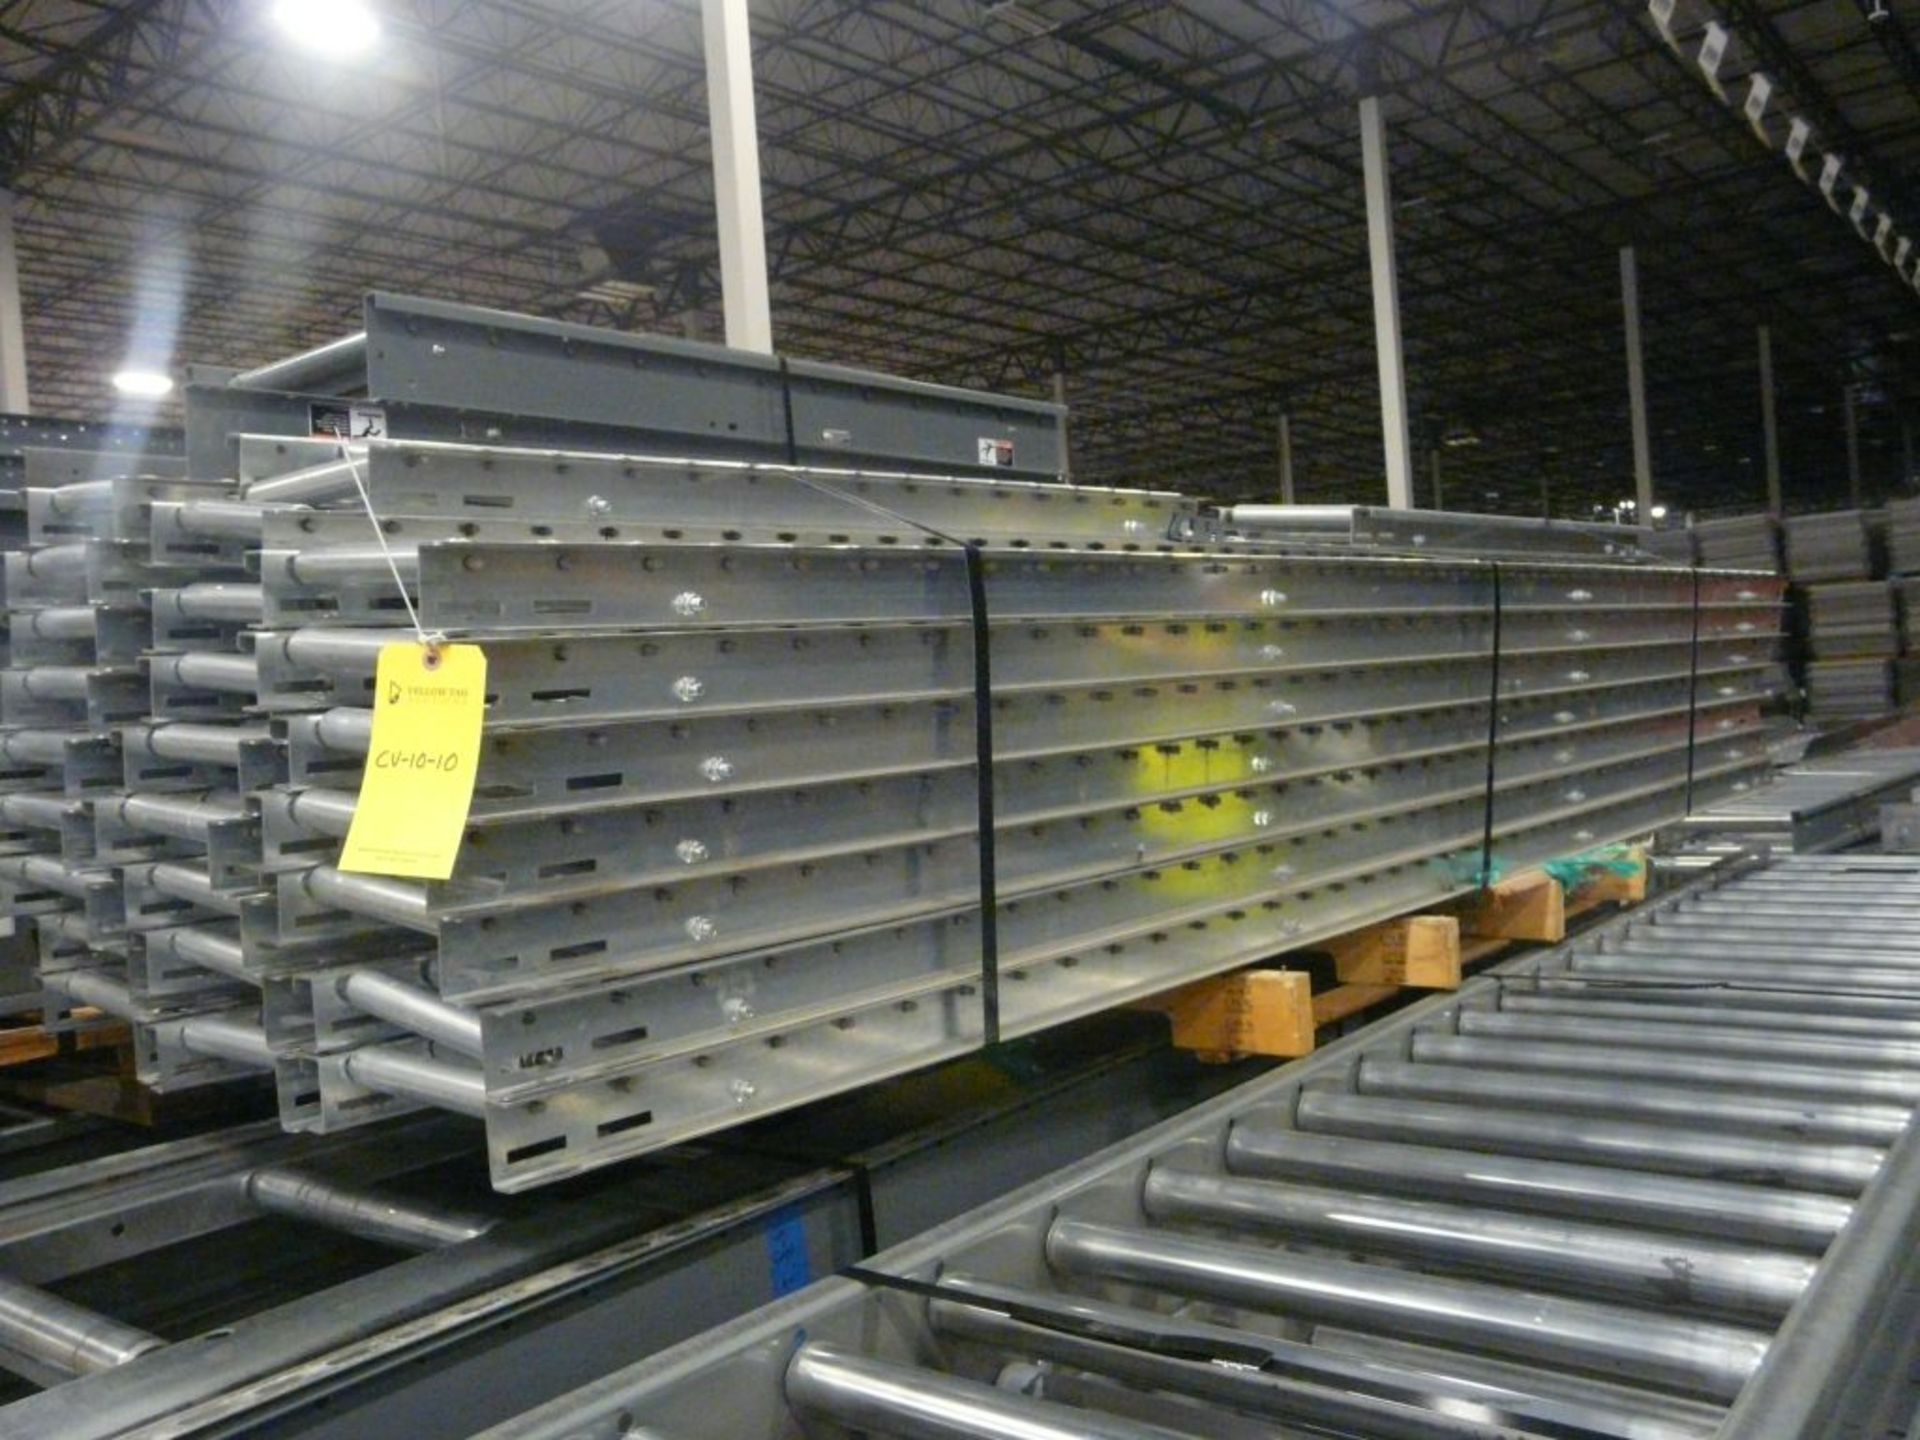 Lot of (24) Conveyors - 10'L x 10"W; Tag: 223544 - $30 Lot Loading Fee